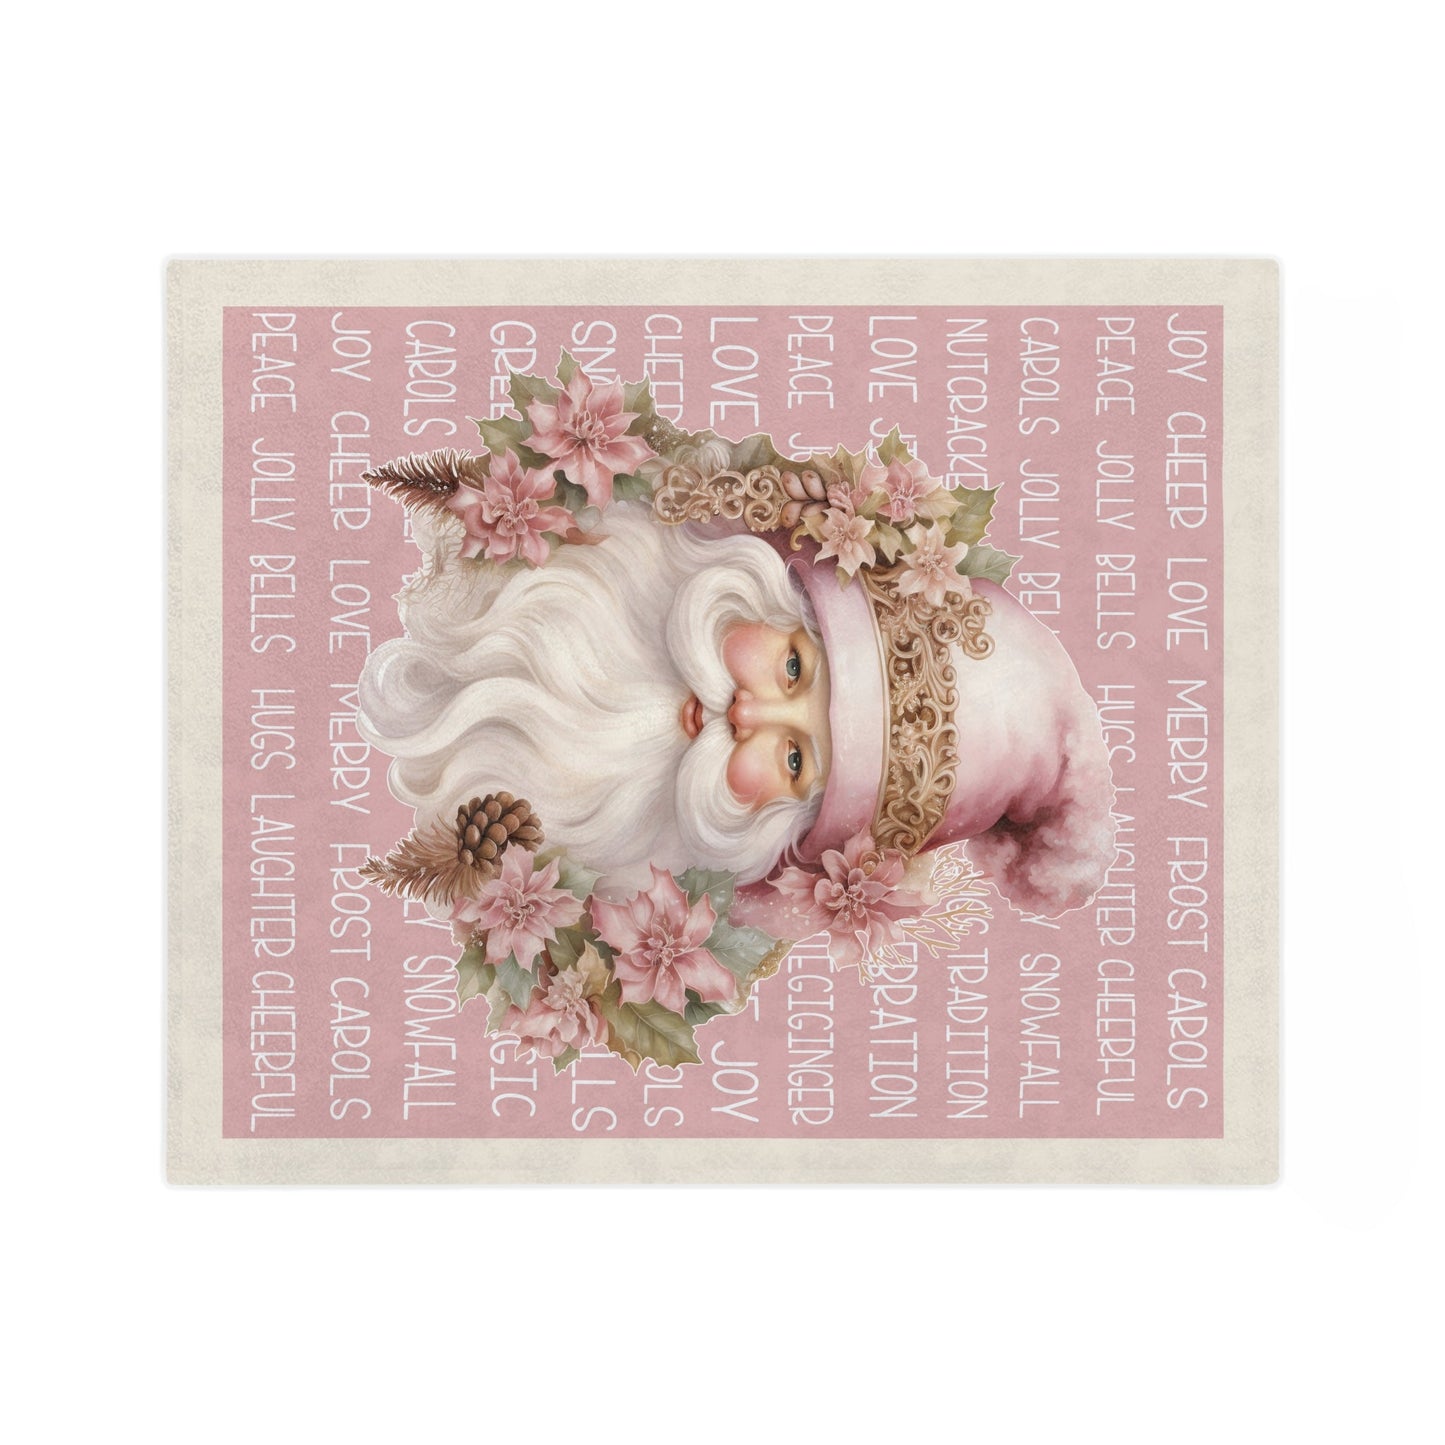 Victorian Pastel Pink Santa Christmas Blanket - A Timeless Keepsake, Perfect for Snuggling Down to Watch Christmas Movies, or a early Gift - FlooredByArt